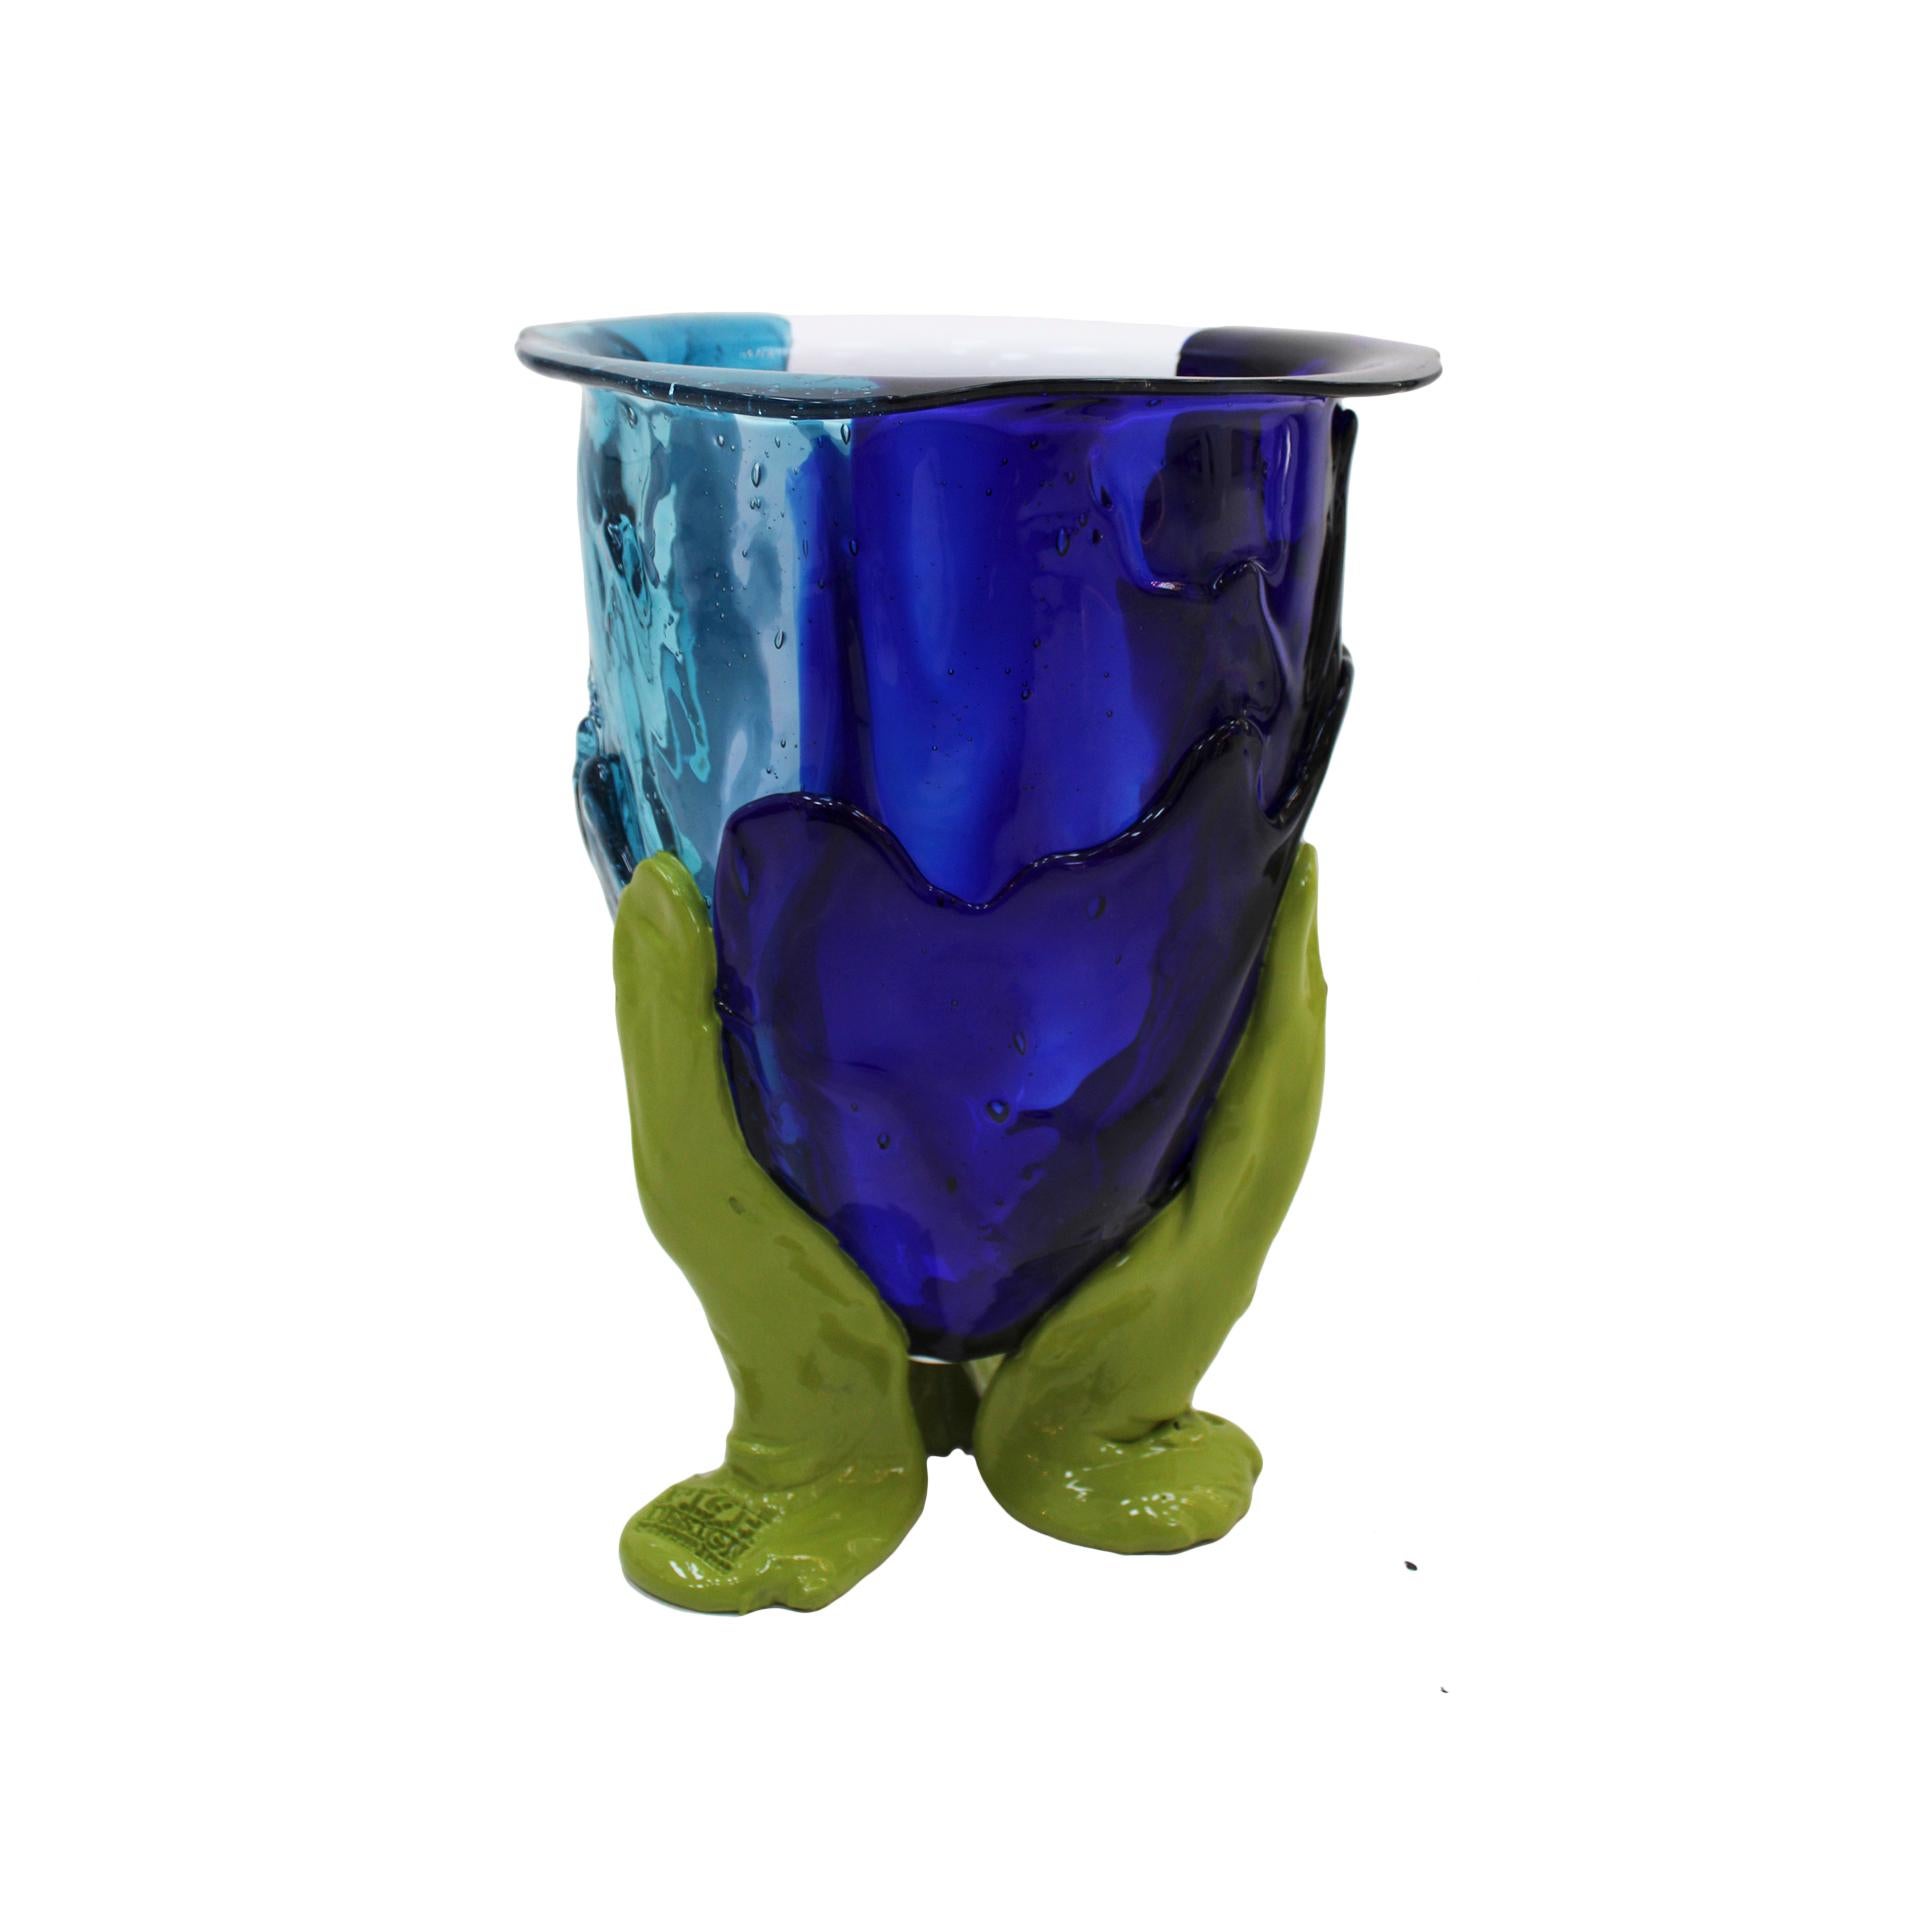 Post-Modern Contemporary Vase Designed by Gaetano Pesce in 1995 for Fish Design, Italy, 2022